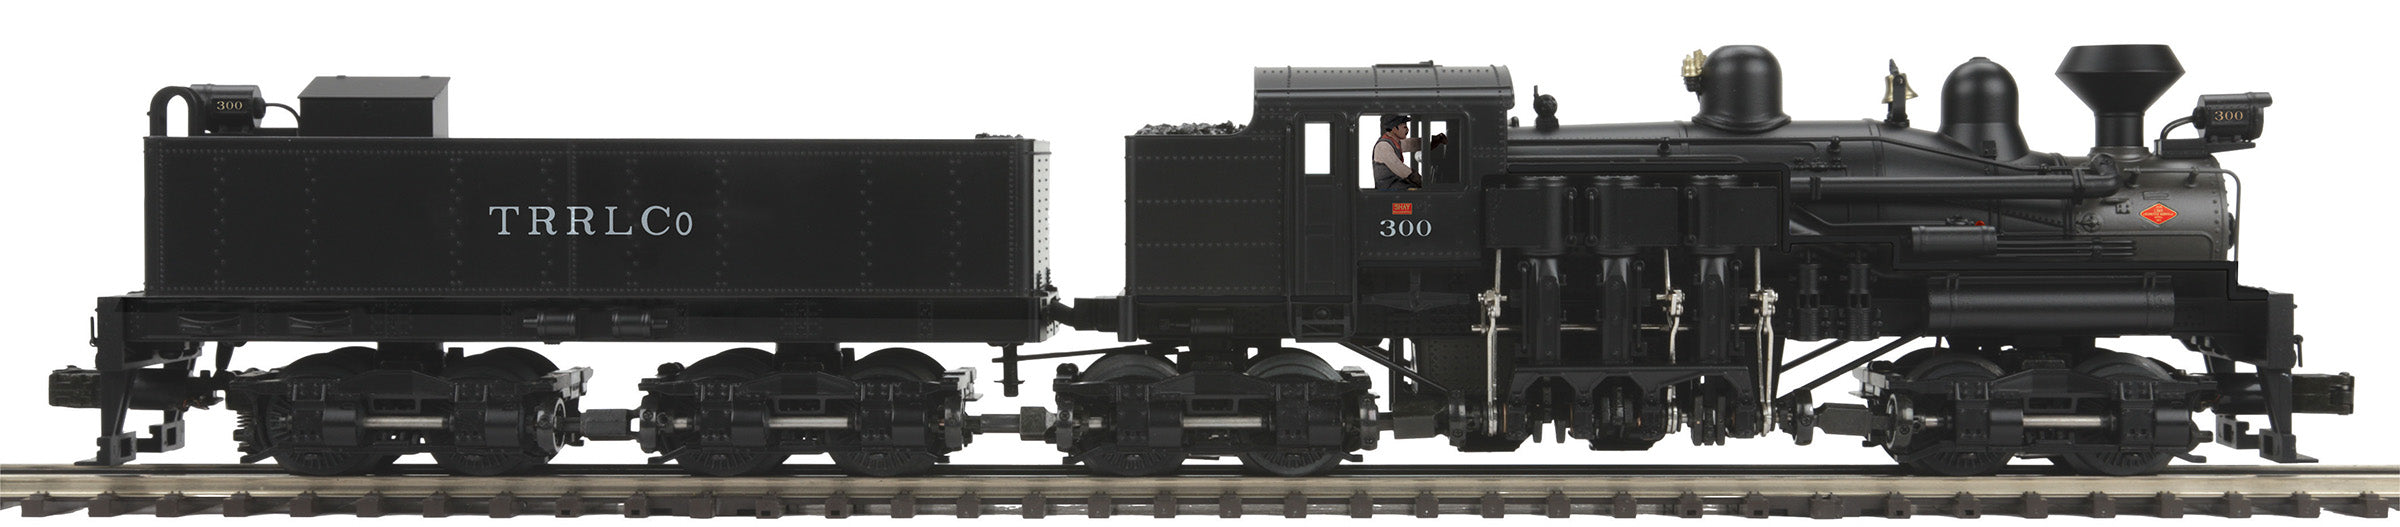 MTH 20-3884-1 - 4-Truck Shay Steam Engine "Red River Logging Co." #300 w/ PS3